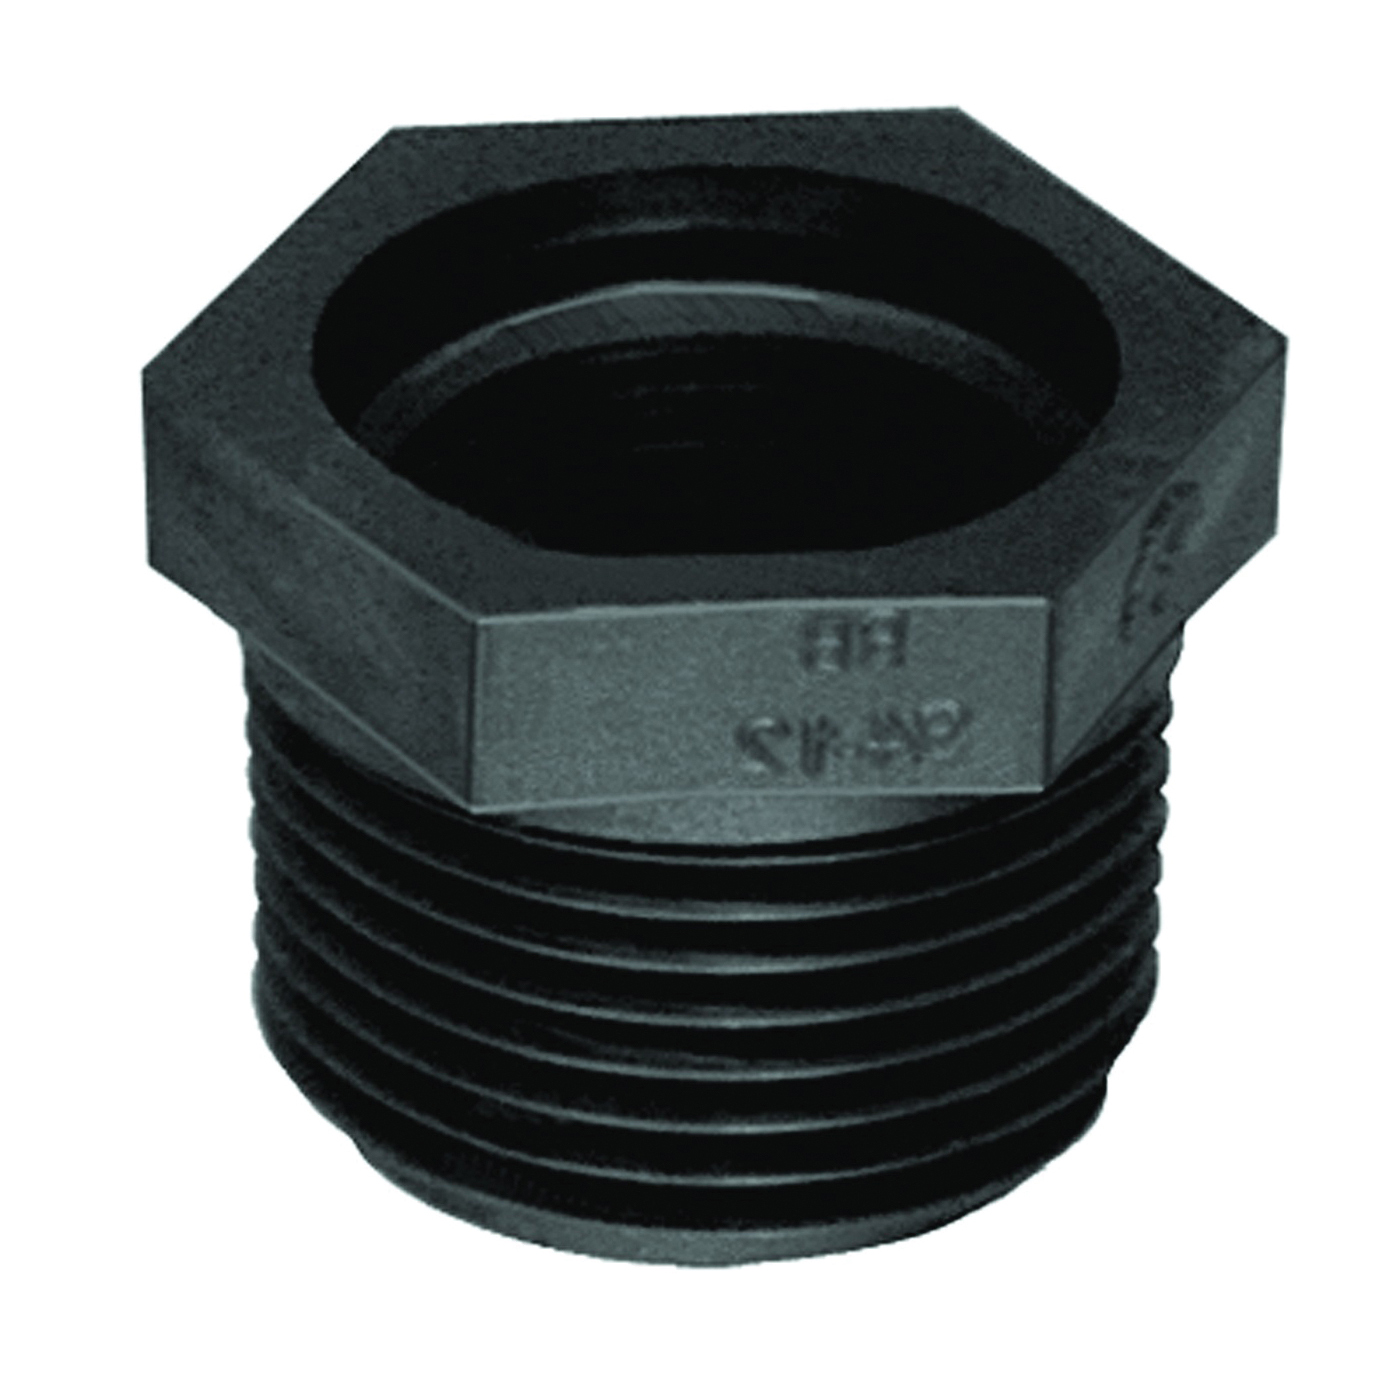 RB200-112P Reducing Pipe Bushing, 2 x 1-1/2 in, MPT x FPT, Black